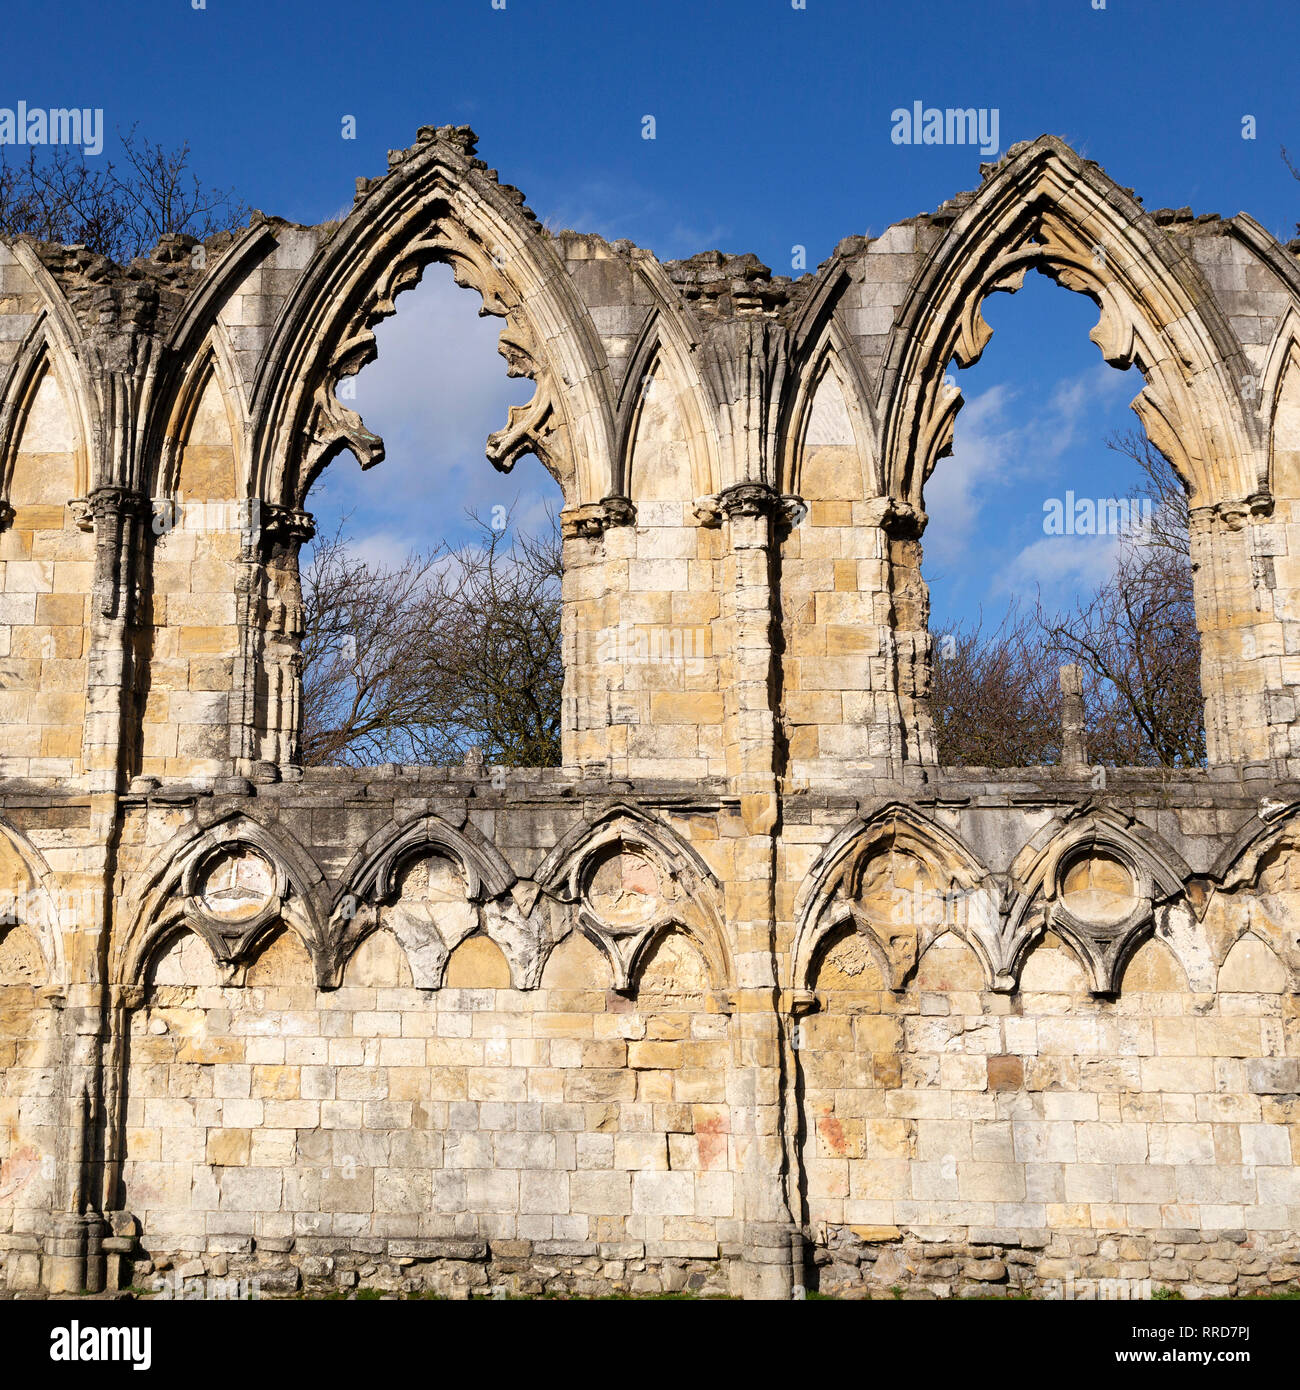 The ruins of St Mary's Abbey in York, England. The Benedictine Abbey was known as the richest in the north of England and was dissolved in 1539. Stock Photo